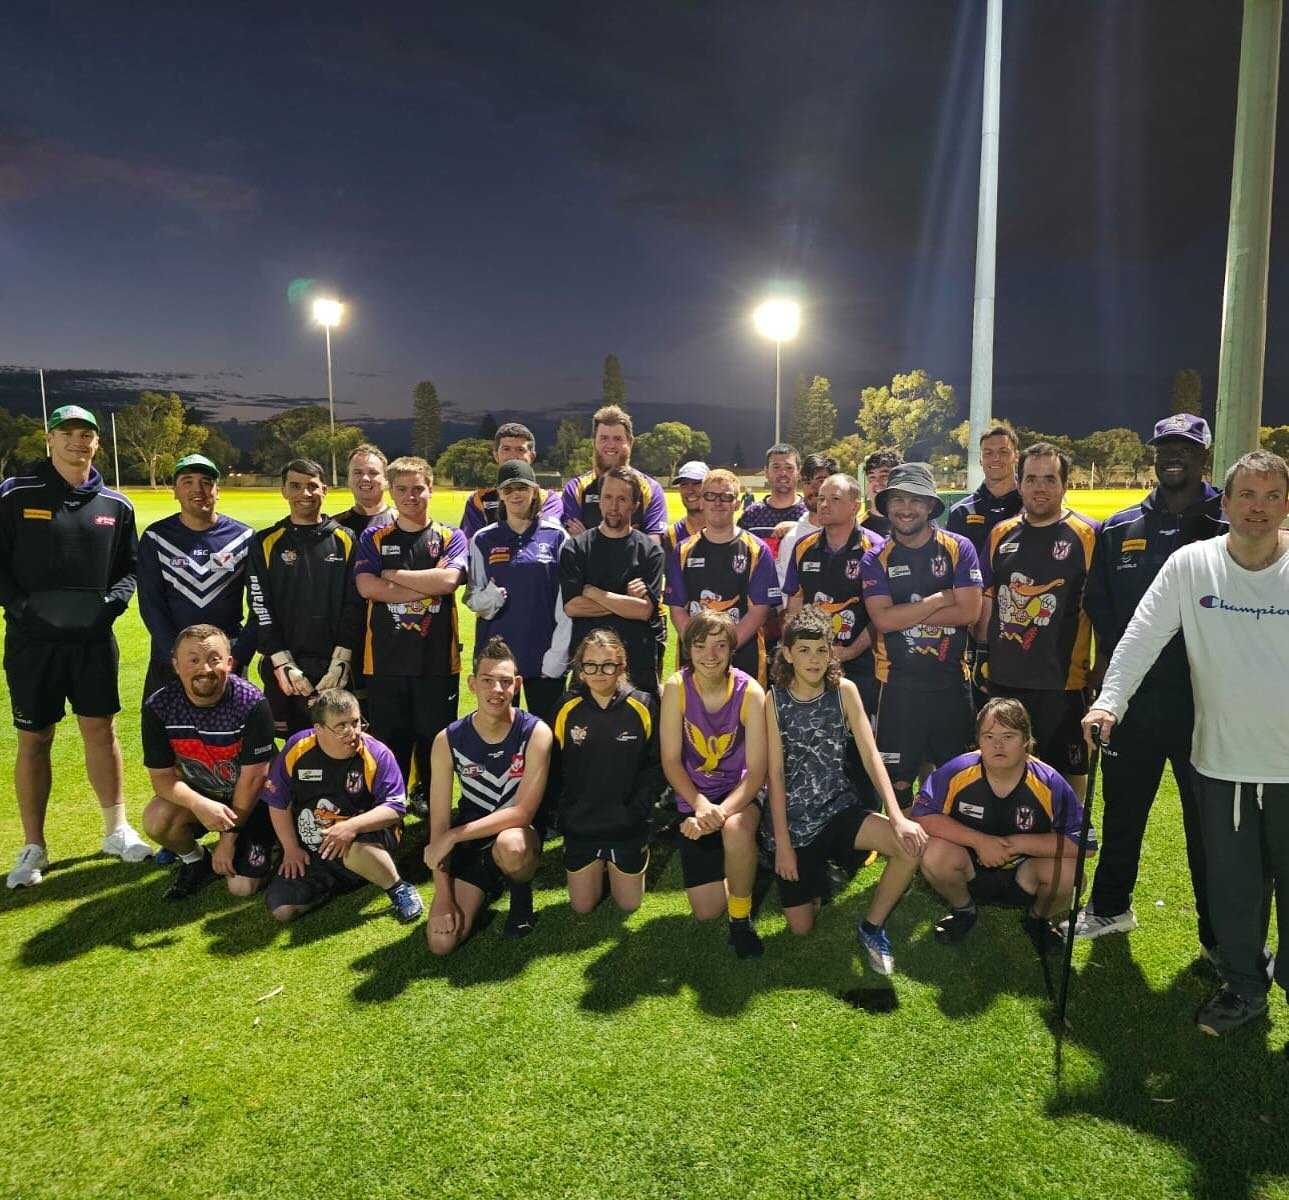 The @freodockers joined the Warnbro Swans Integrated team at training🙌🏼

Smiles all round 🏉

#howgoodisfooty
#footyinclusion